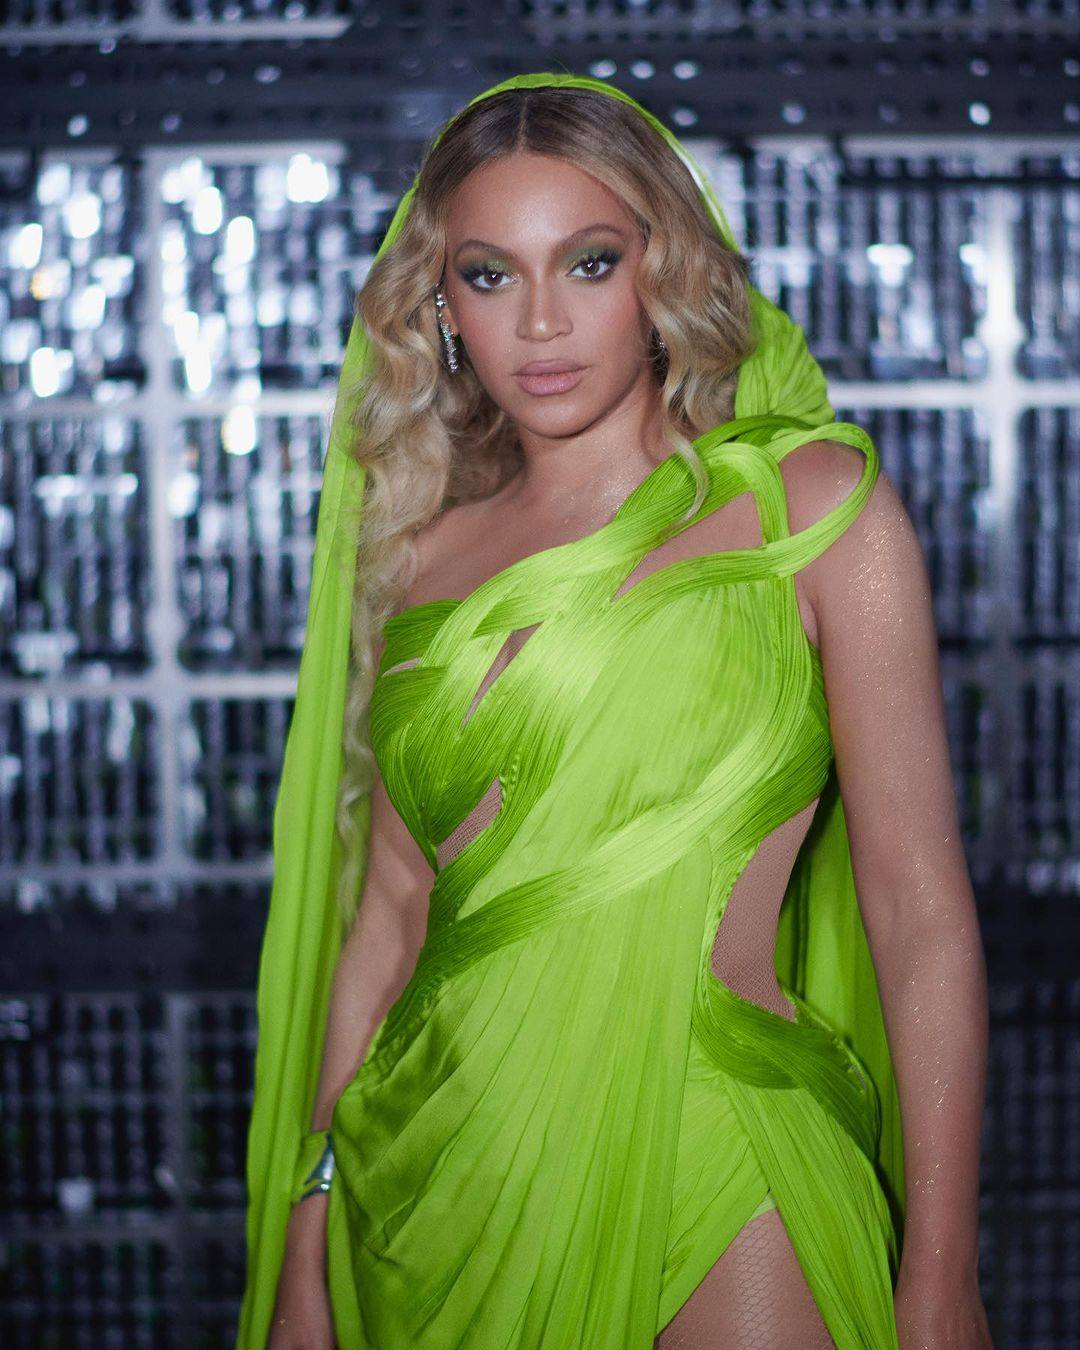 Beyoncé recently received criticism online for releasing photos where she looked “white skinned”, but mum Tina Knowles has had enough of the trolling. Photo: @beyonce/Instagram